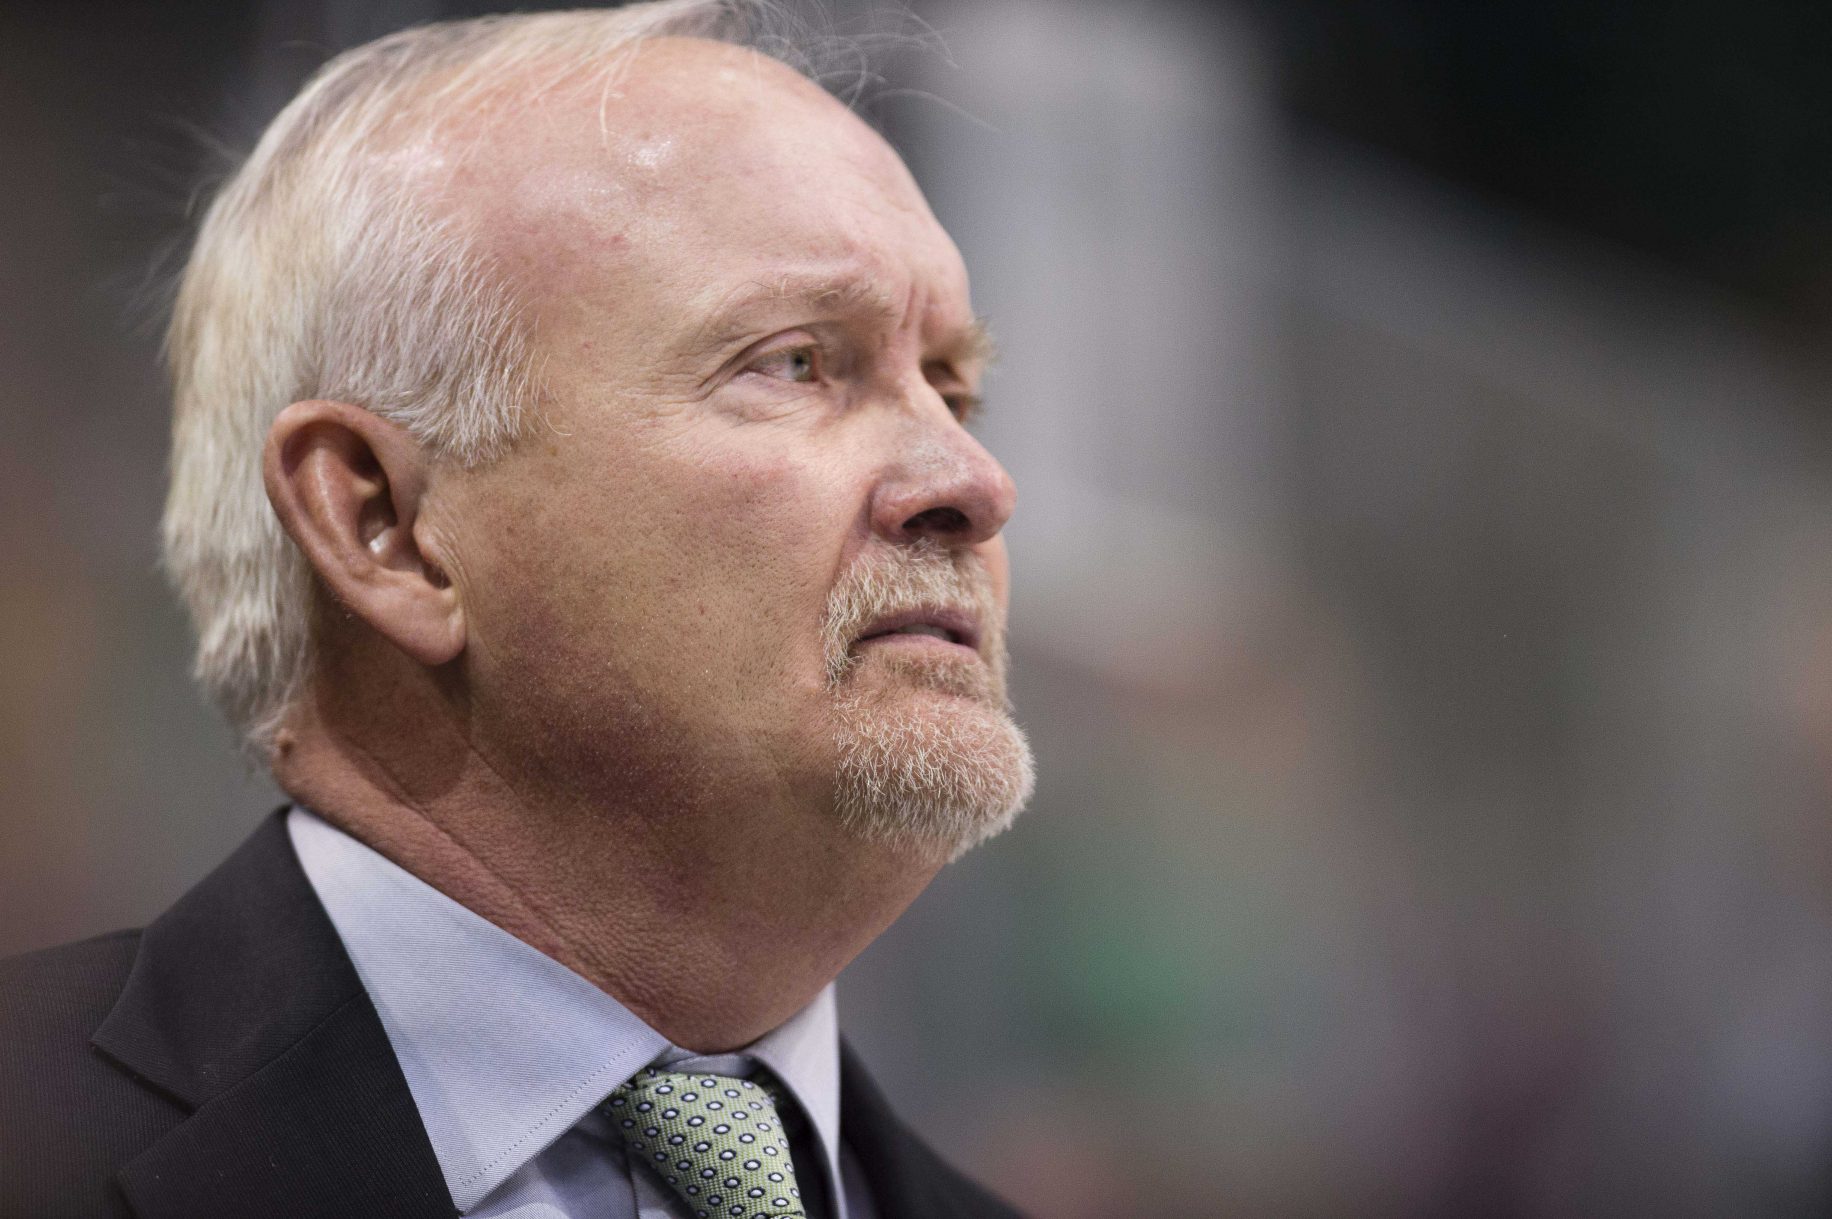 It's Time For the New Jersey Devils to Find a New Head Coach: Lindy Ruff,  Perhaps